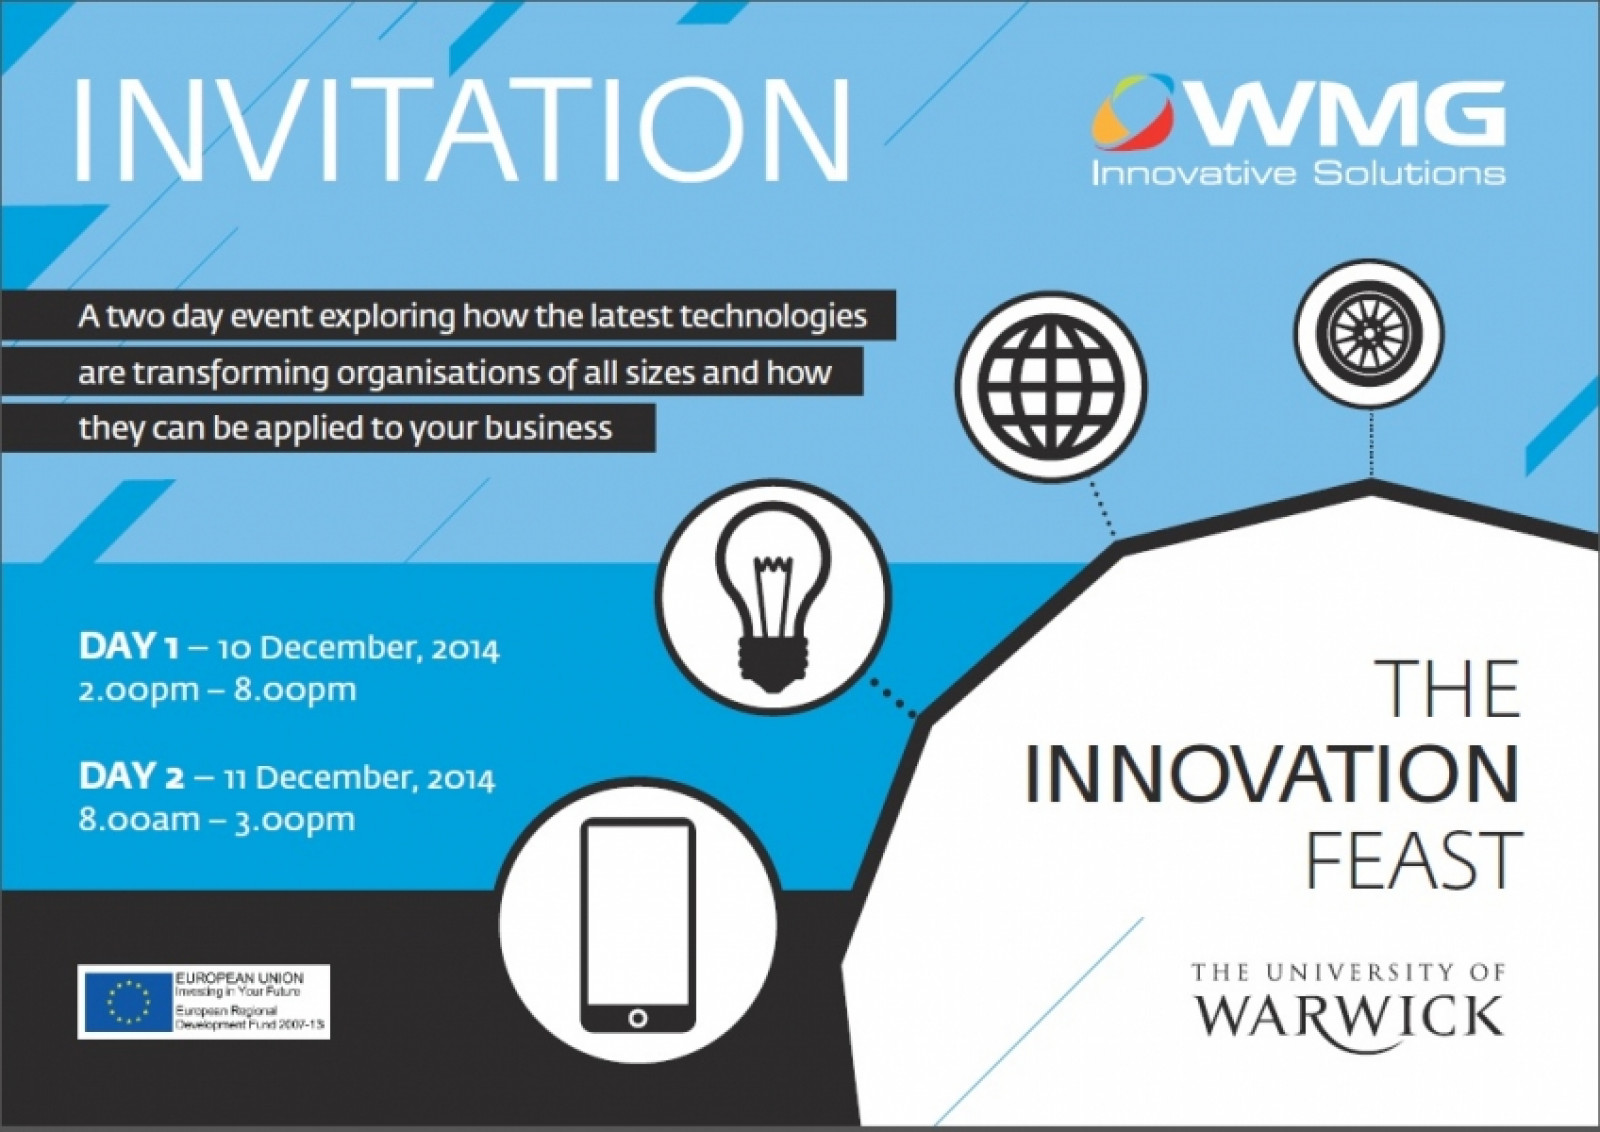 Innovation Feast Event coming to WMG in December